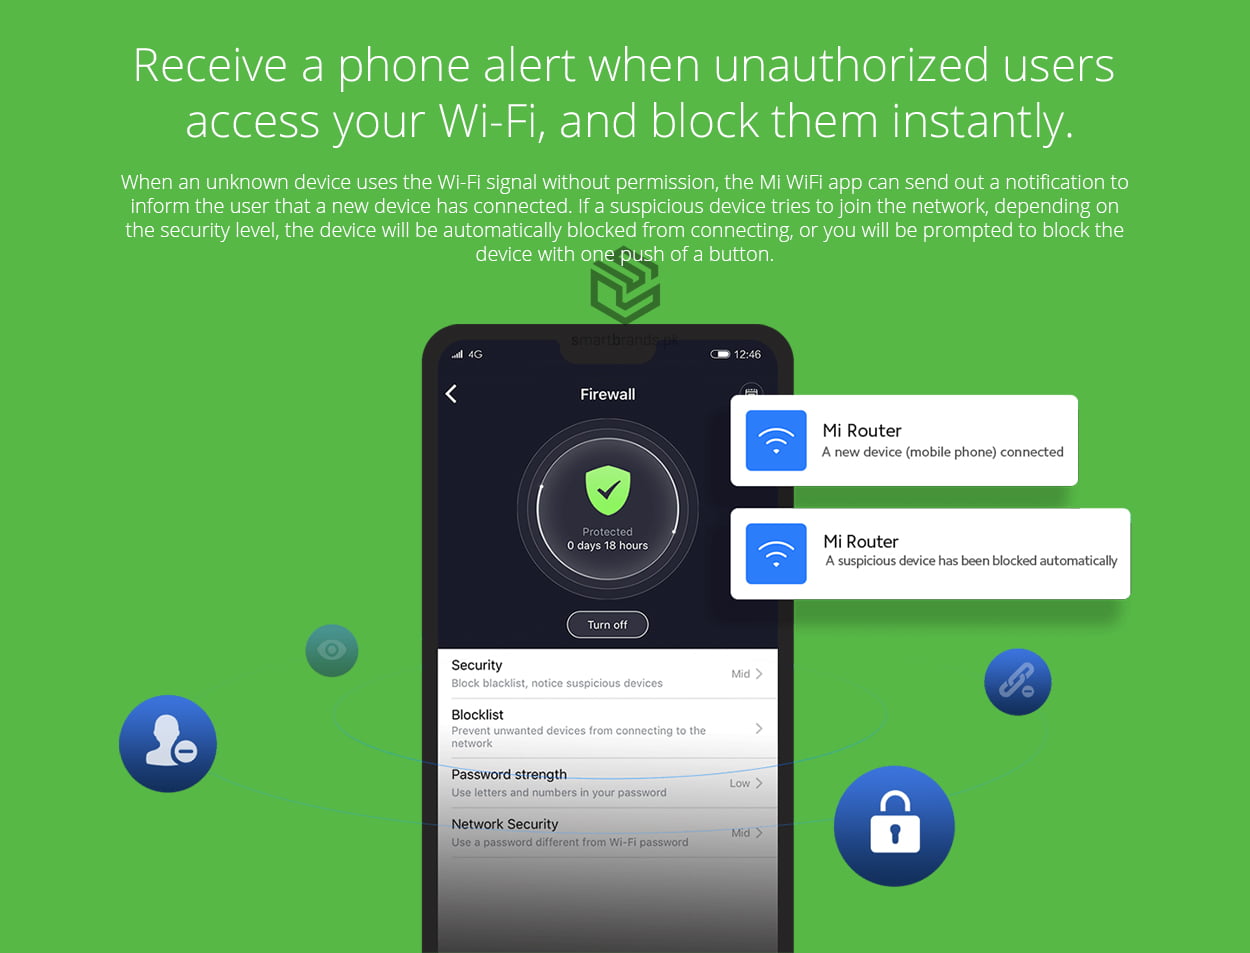 Receive a phone alert when unauthorized users access your Wi-Fi, and block them instantly. When an unknown device uses the Wi-Fi signal without permission, the Mi WiFi app can send out a notification to inform the user that a new device has connected. If a suspicious device tries to join the network, depending on the security level, the device will be automatically blocked from connecting, or you will be prompted to block the device with one push of a button.